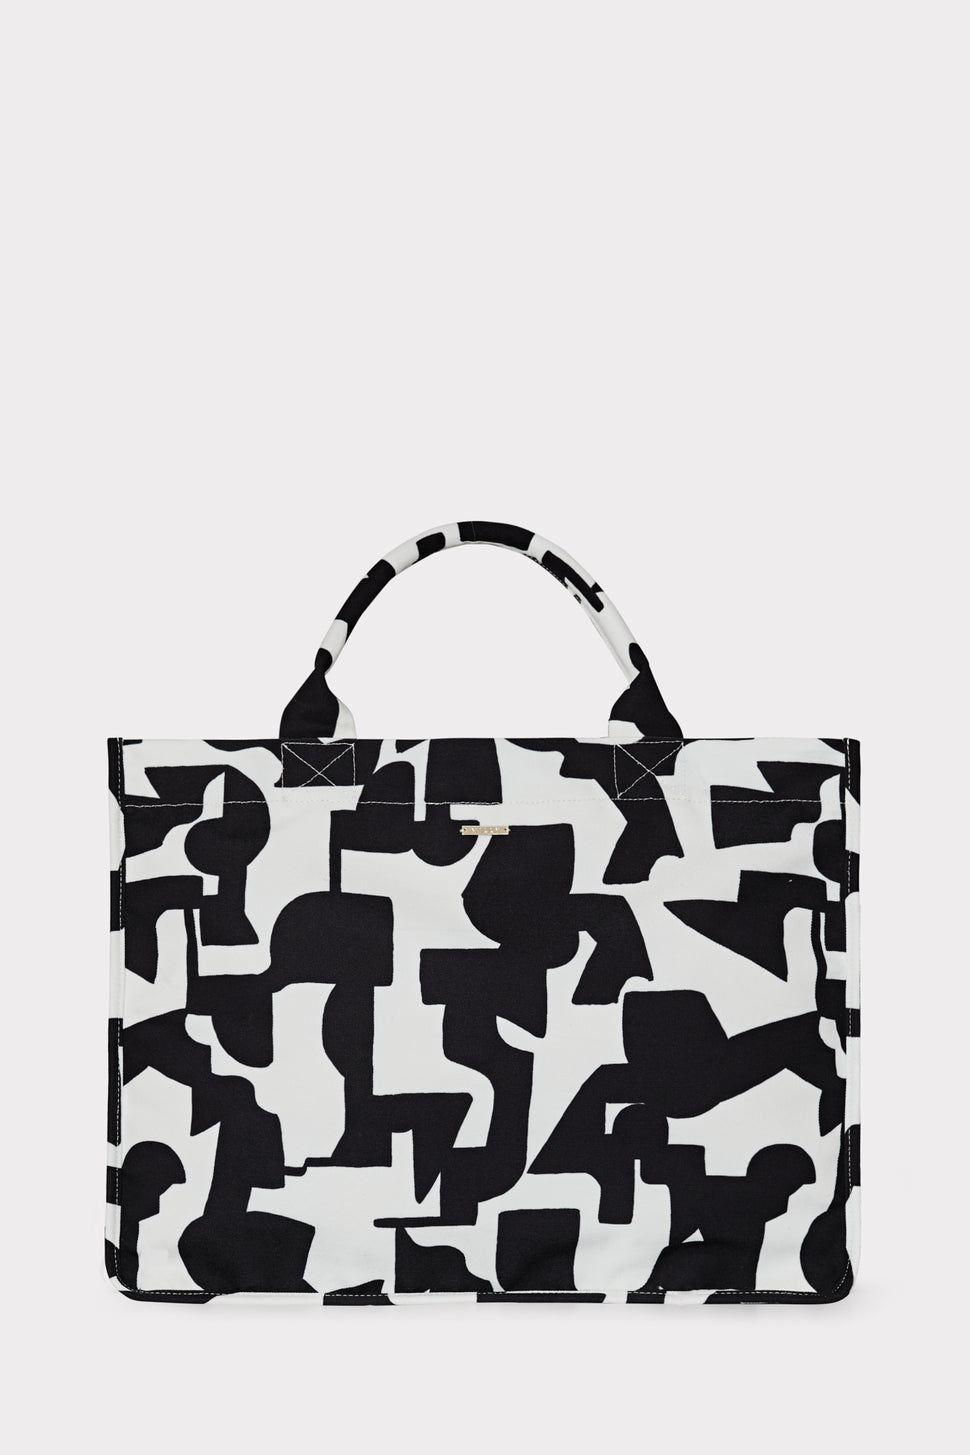 M gray Cow print leather Pocket tote bag